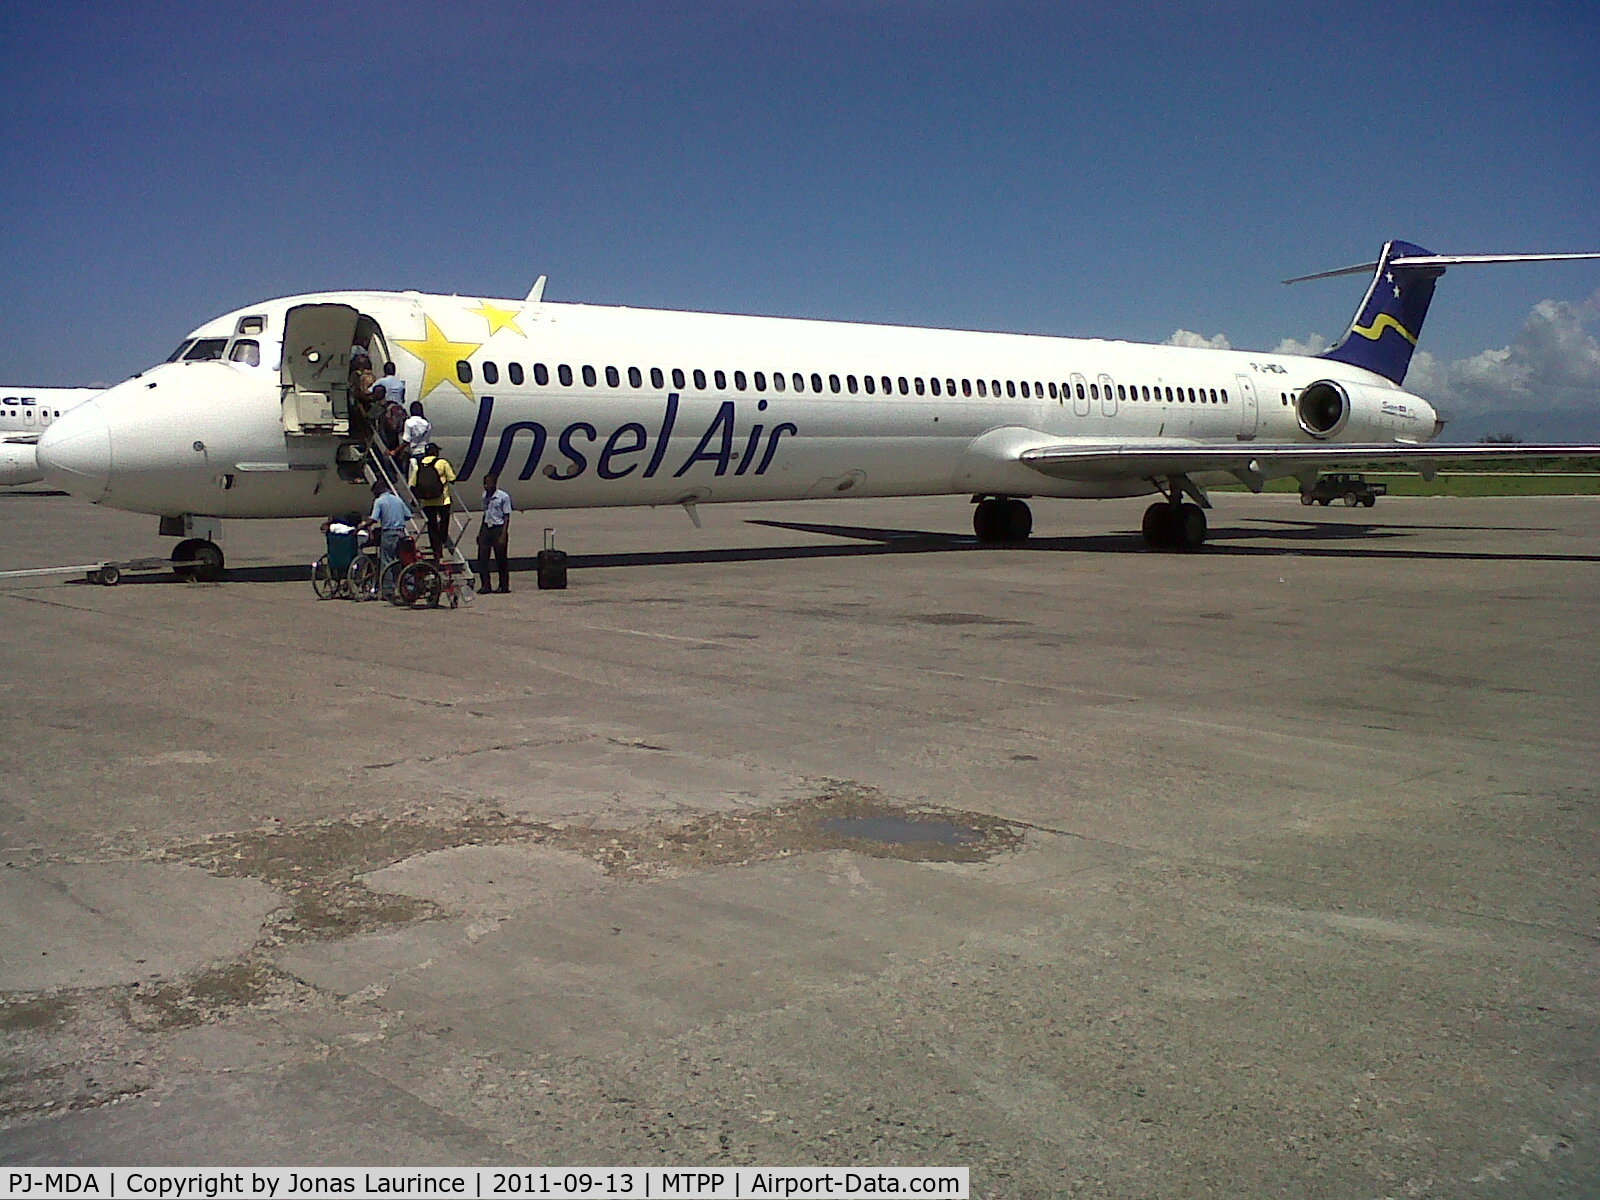 PJ-MDA, 1987 McDonnell Douglas MD-83 (DC-9-83) C/N 49449, Boarding at Insel Air aircraft at the Toussaint Louverture International Airport of Port-au-Prince (Direction Miami international Airport MIA)